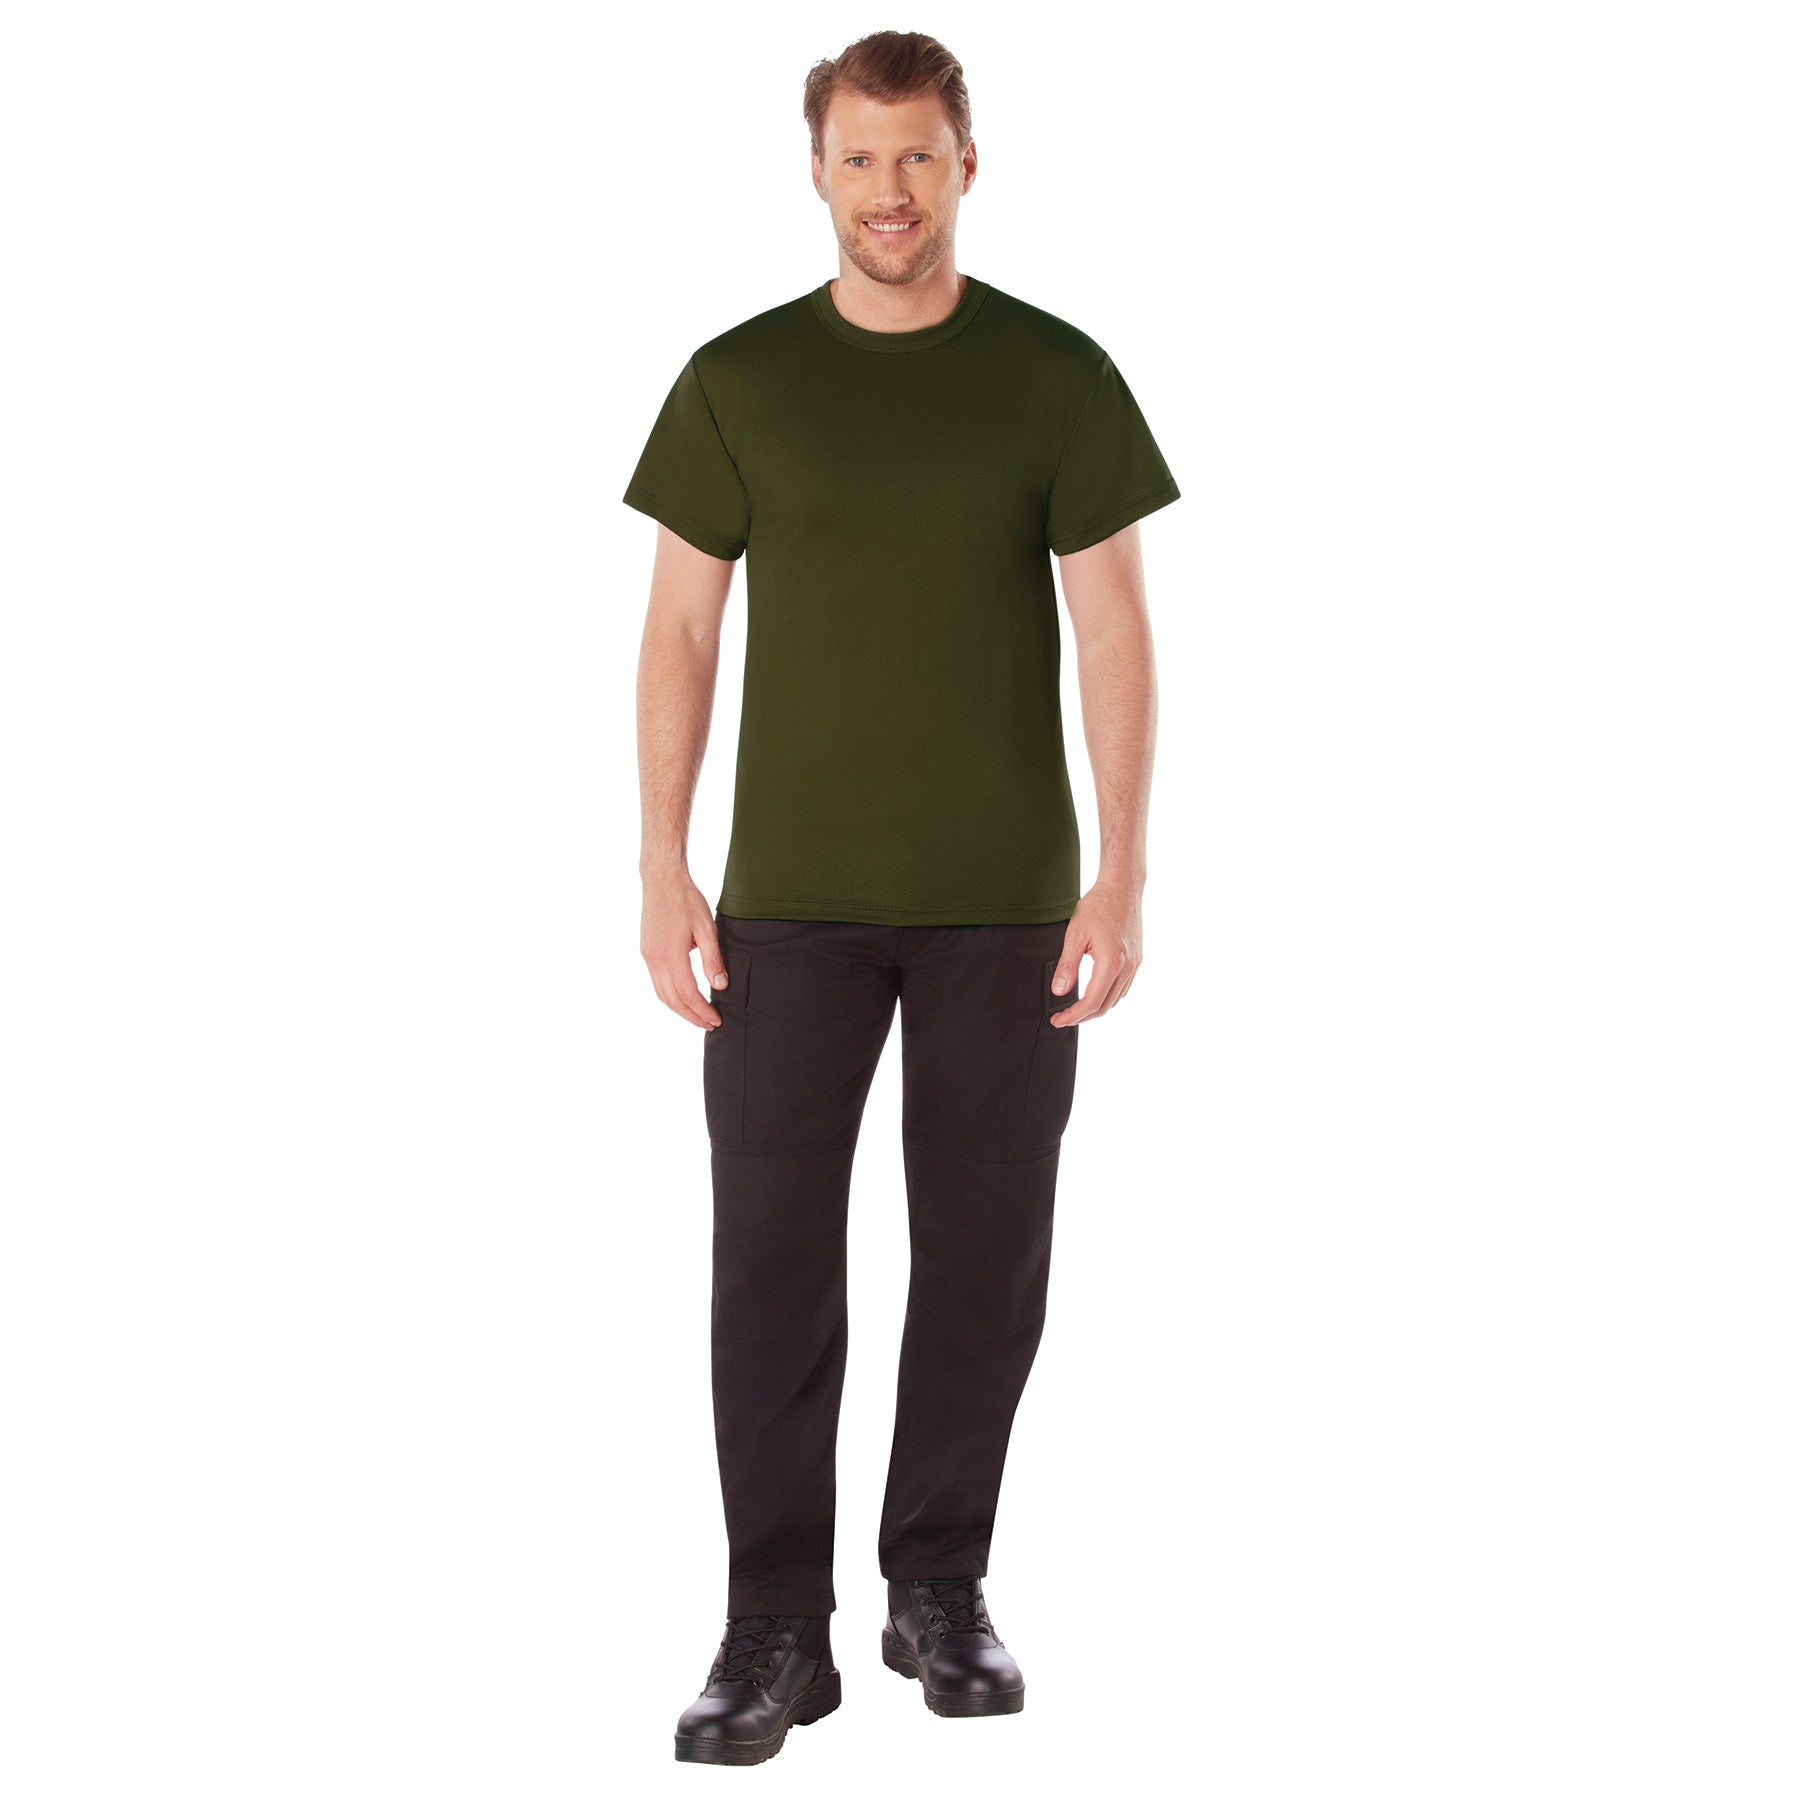 [AR 670-1] Poly Quick Dry Moisture Wicking T-Shirts